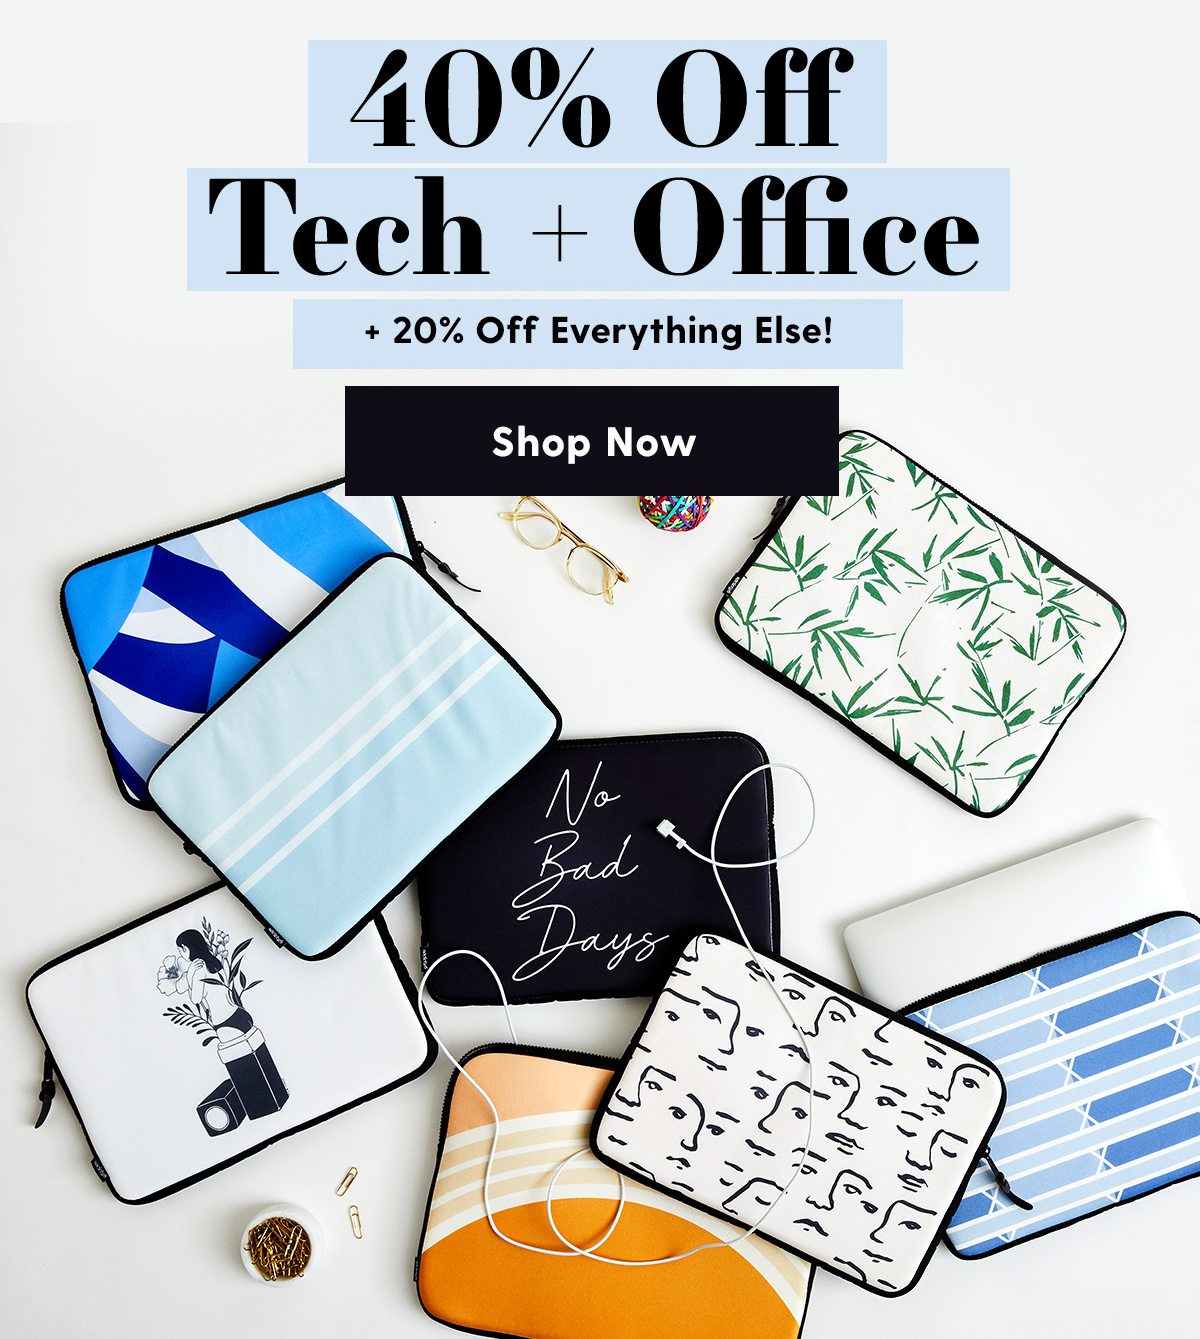 40% Off Tech + Office + 20% Off Everthing Else! Shop Now